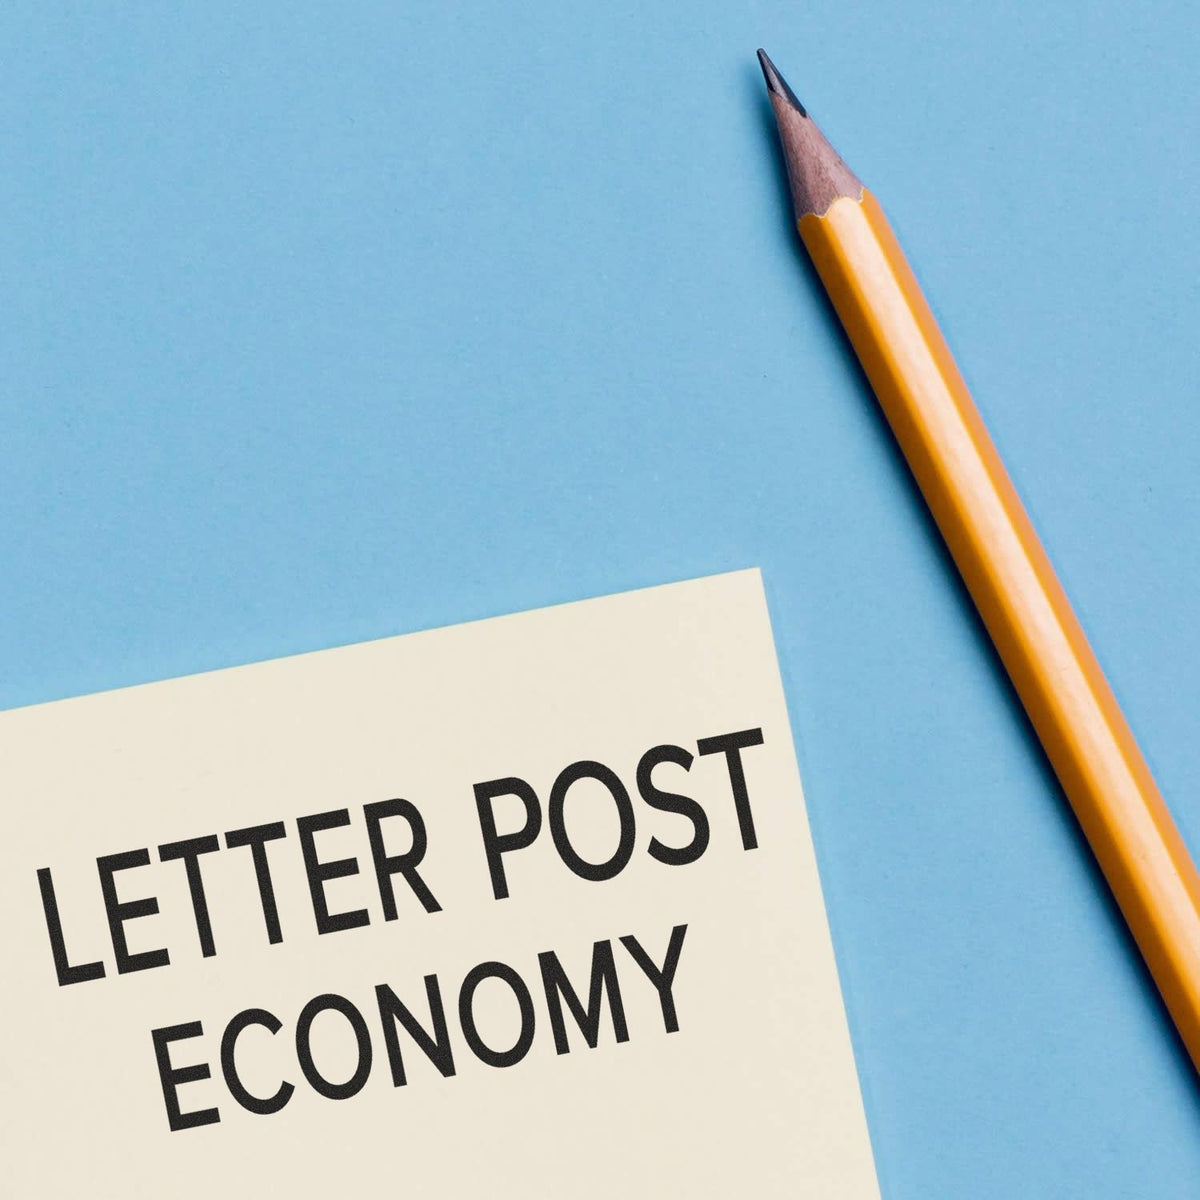 Letter Post Economy Rubber Stamp Lifestyle Photo